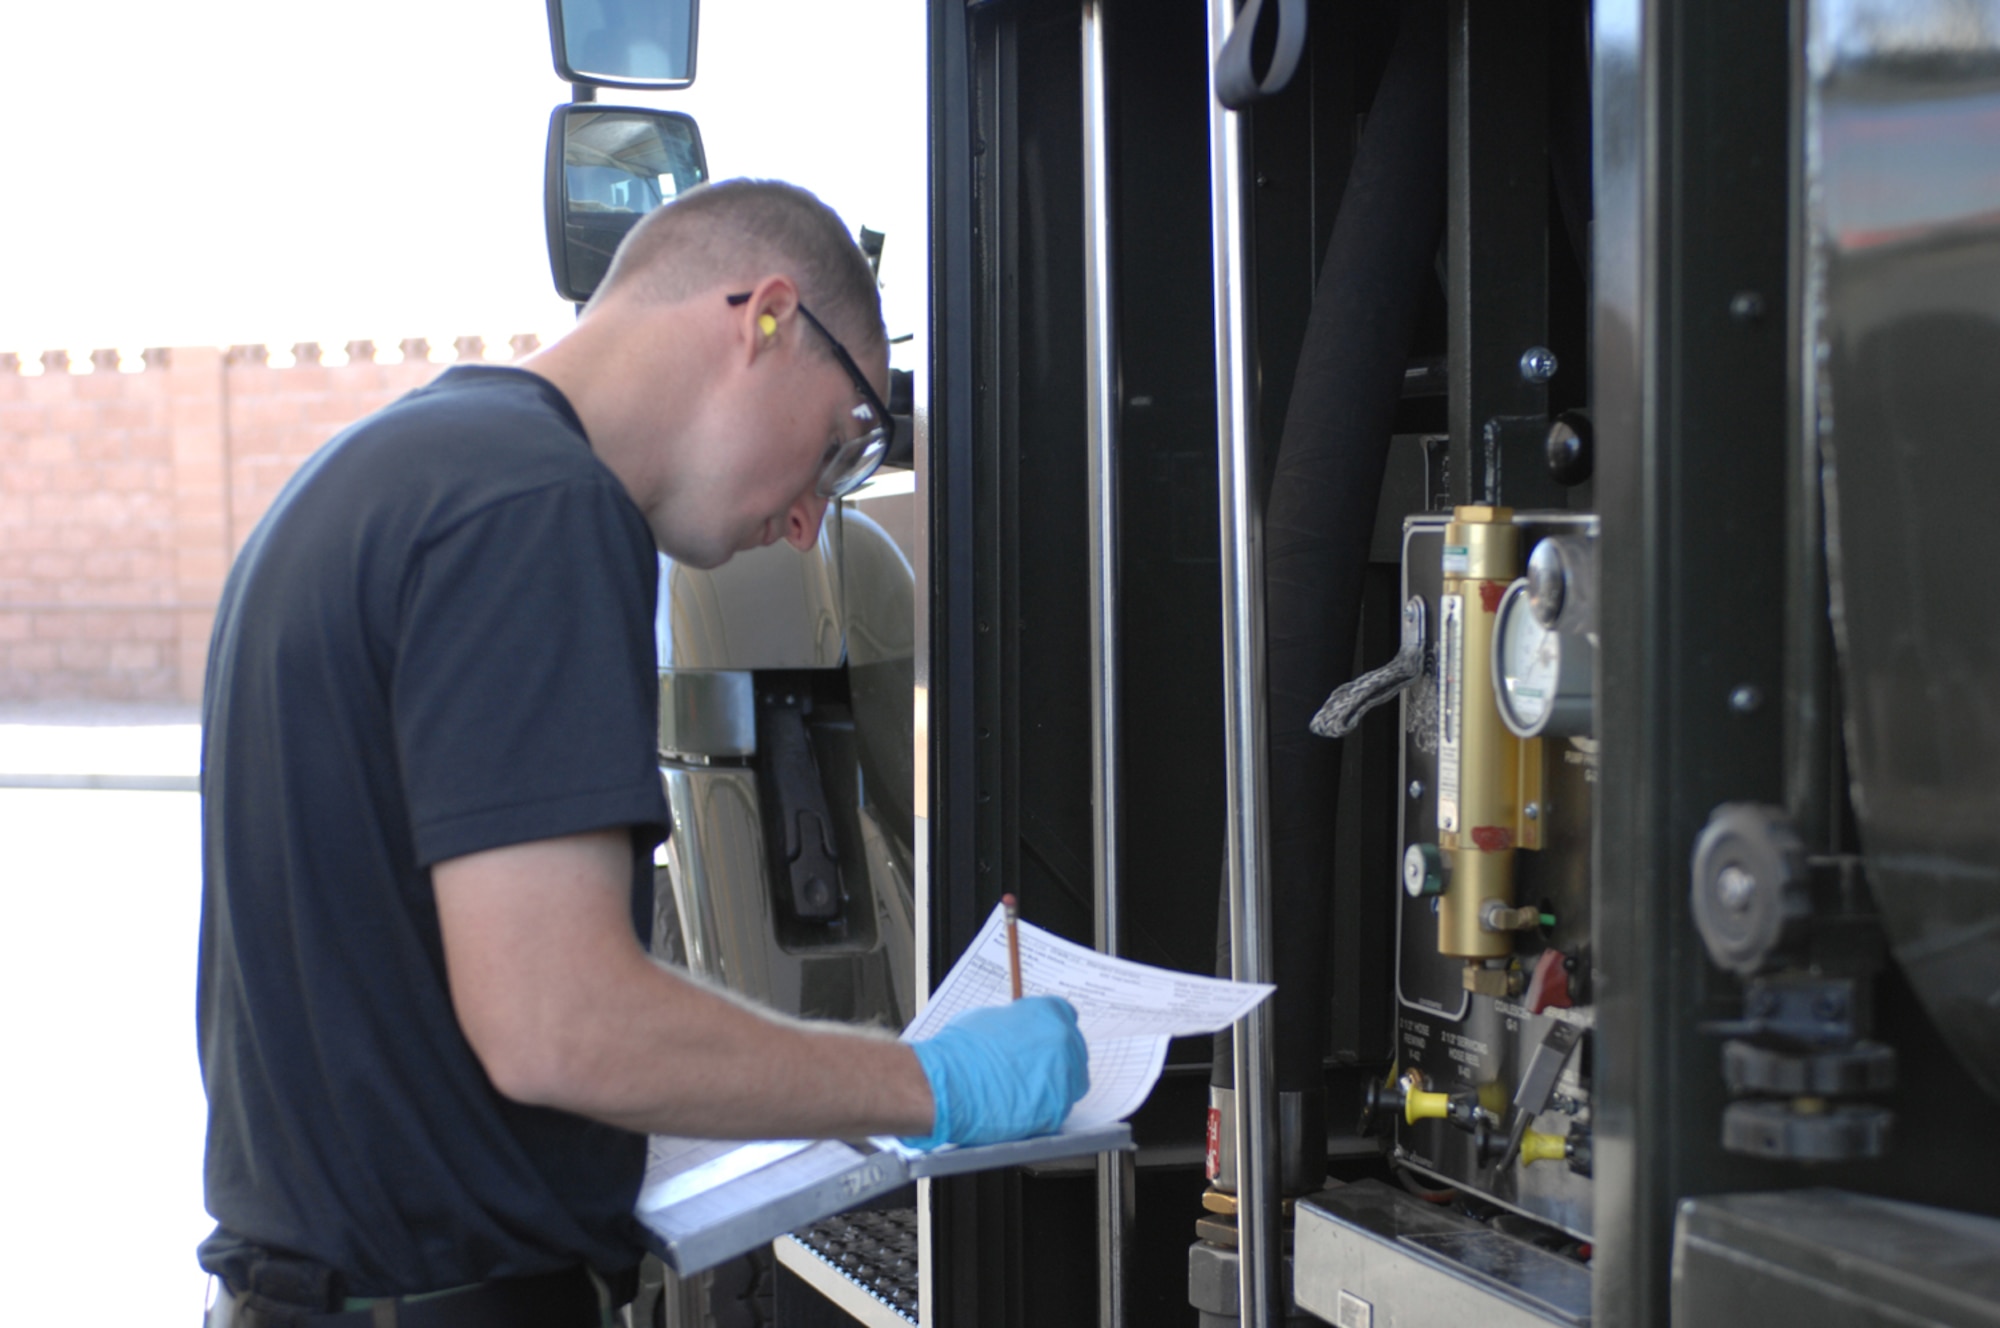 Staff Sgt. Robert Longworth 99th Logistics Readiness Squadron performs Lab by taking samples to make sure the truck is servicable (U.S. Air Force Photo/Senior Airman Jason Huddleston)